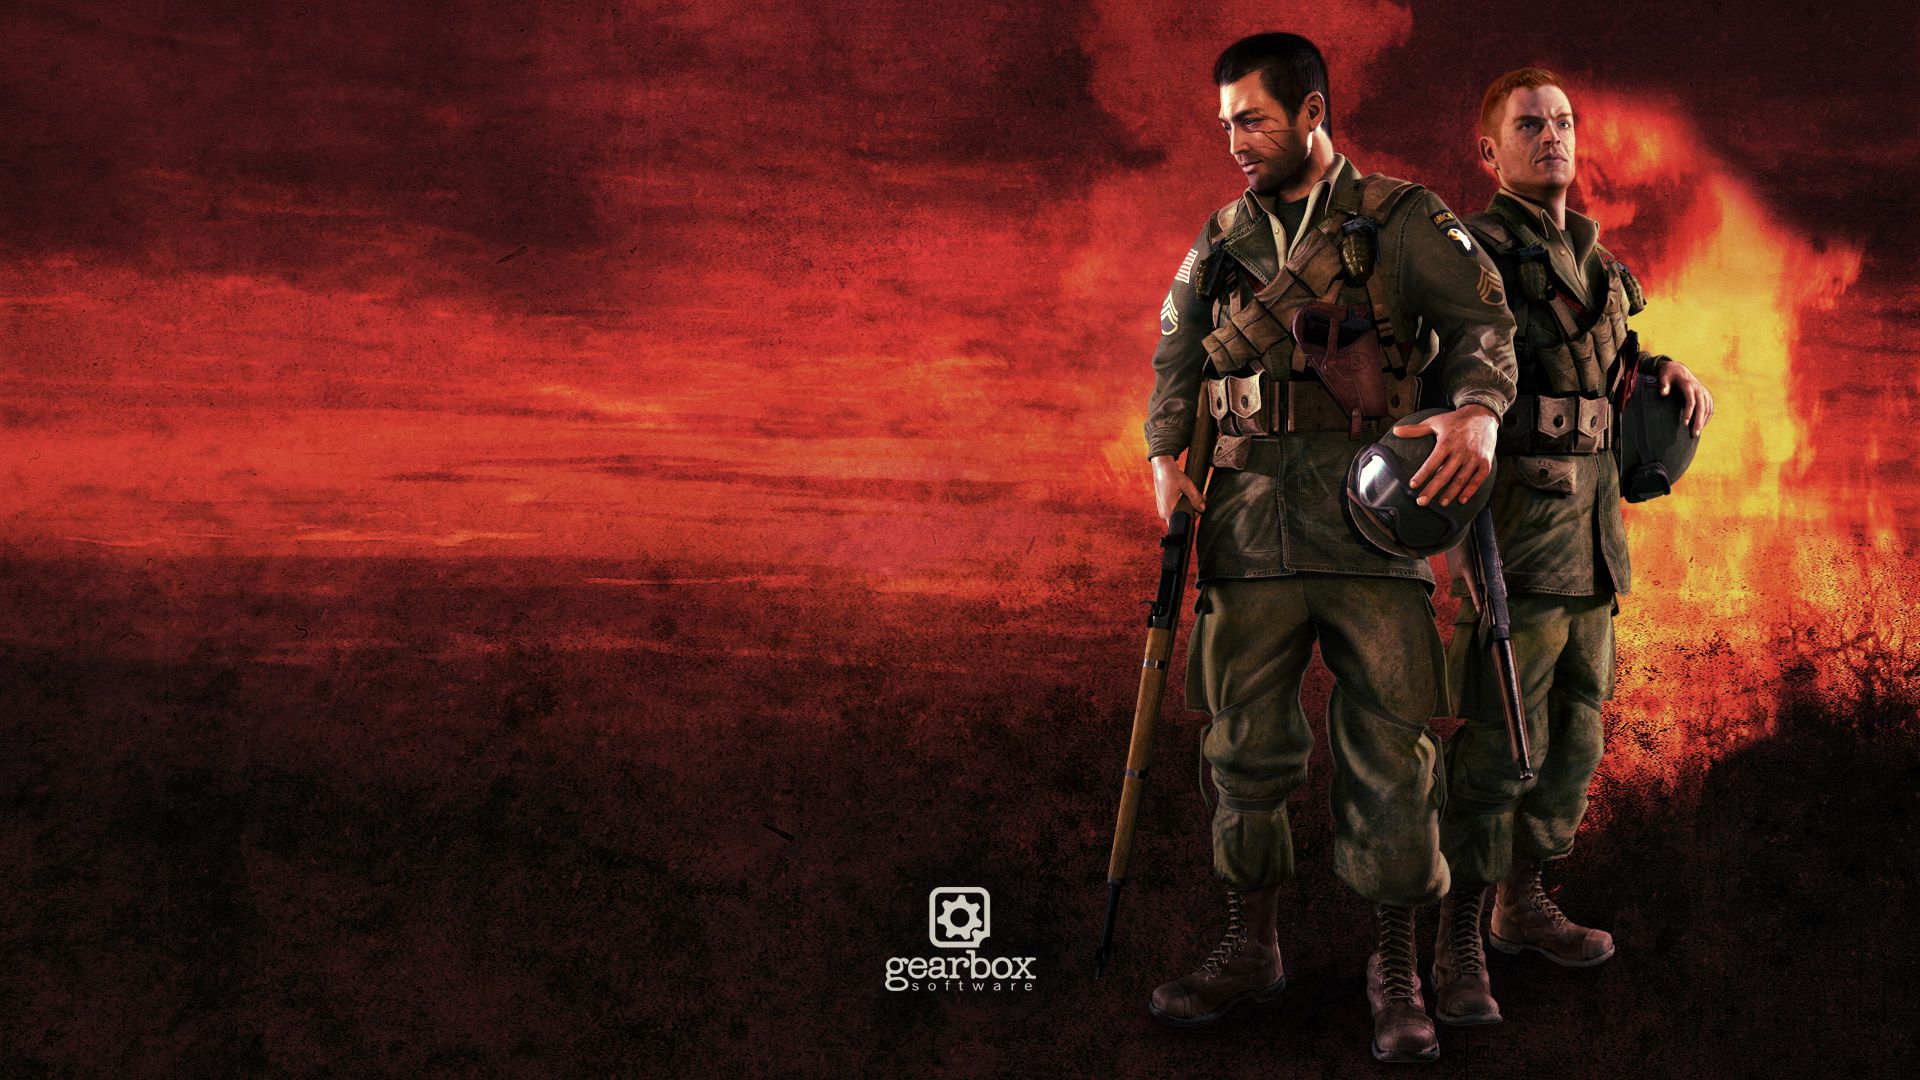 Brothers in Arms: Hell's Highway Wallpapers in 1920x1080.